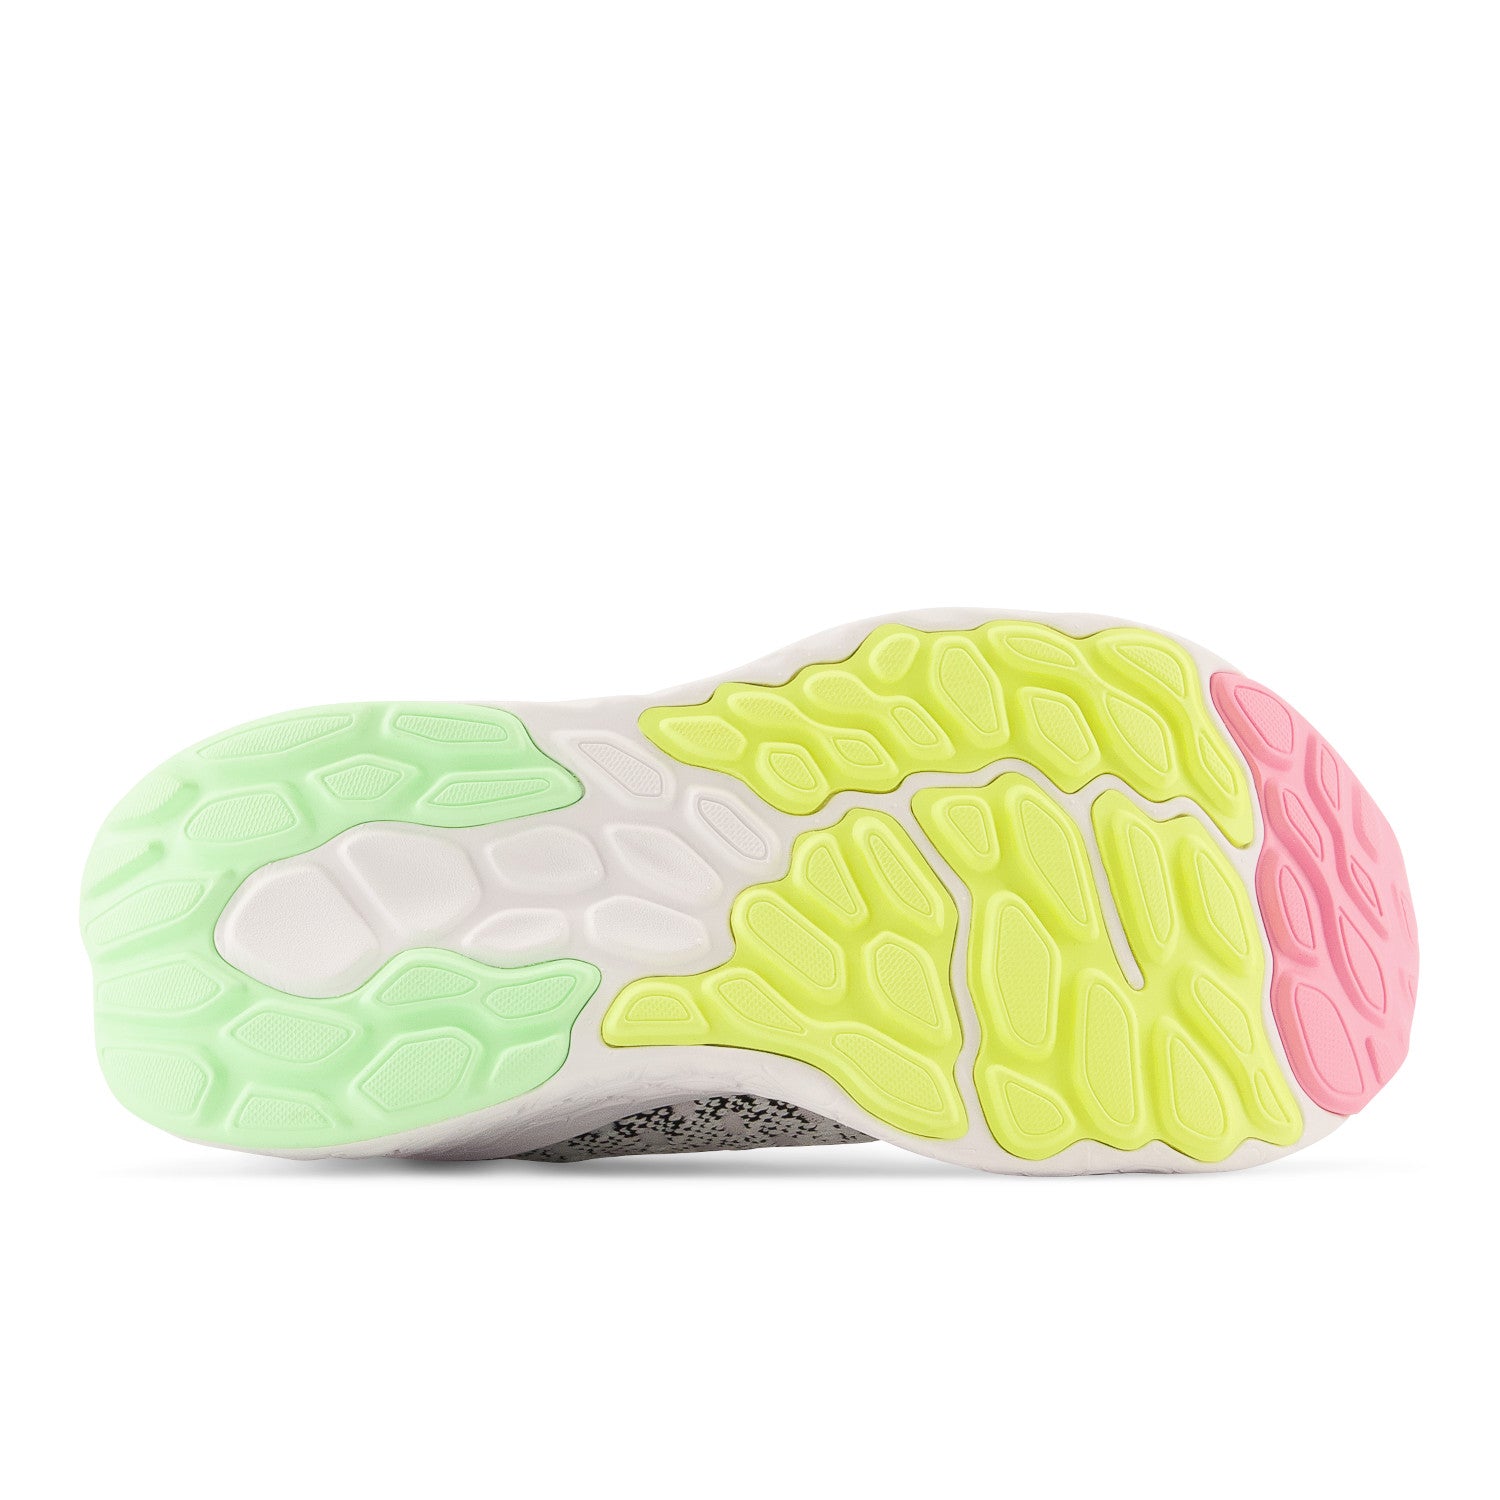 bottom of right shoe with color of green, yellow, pink, and white